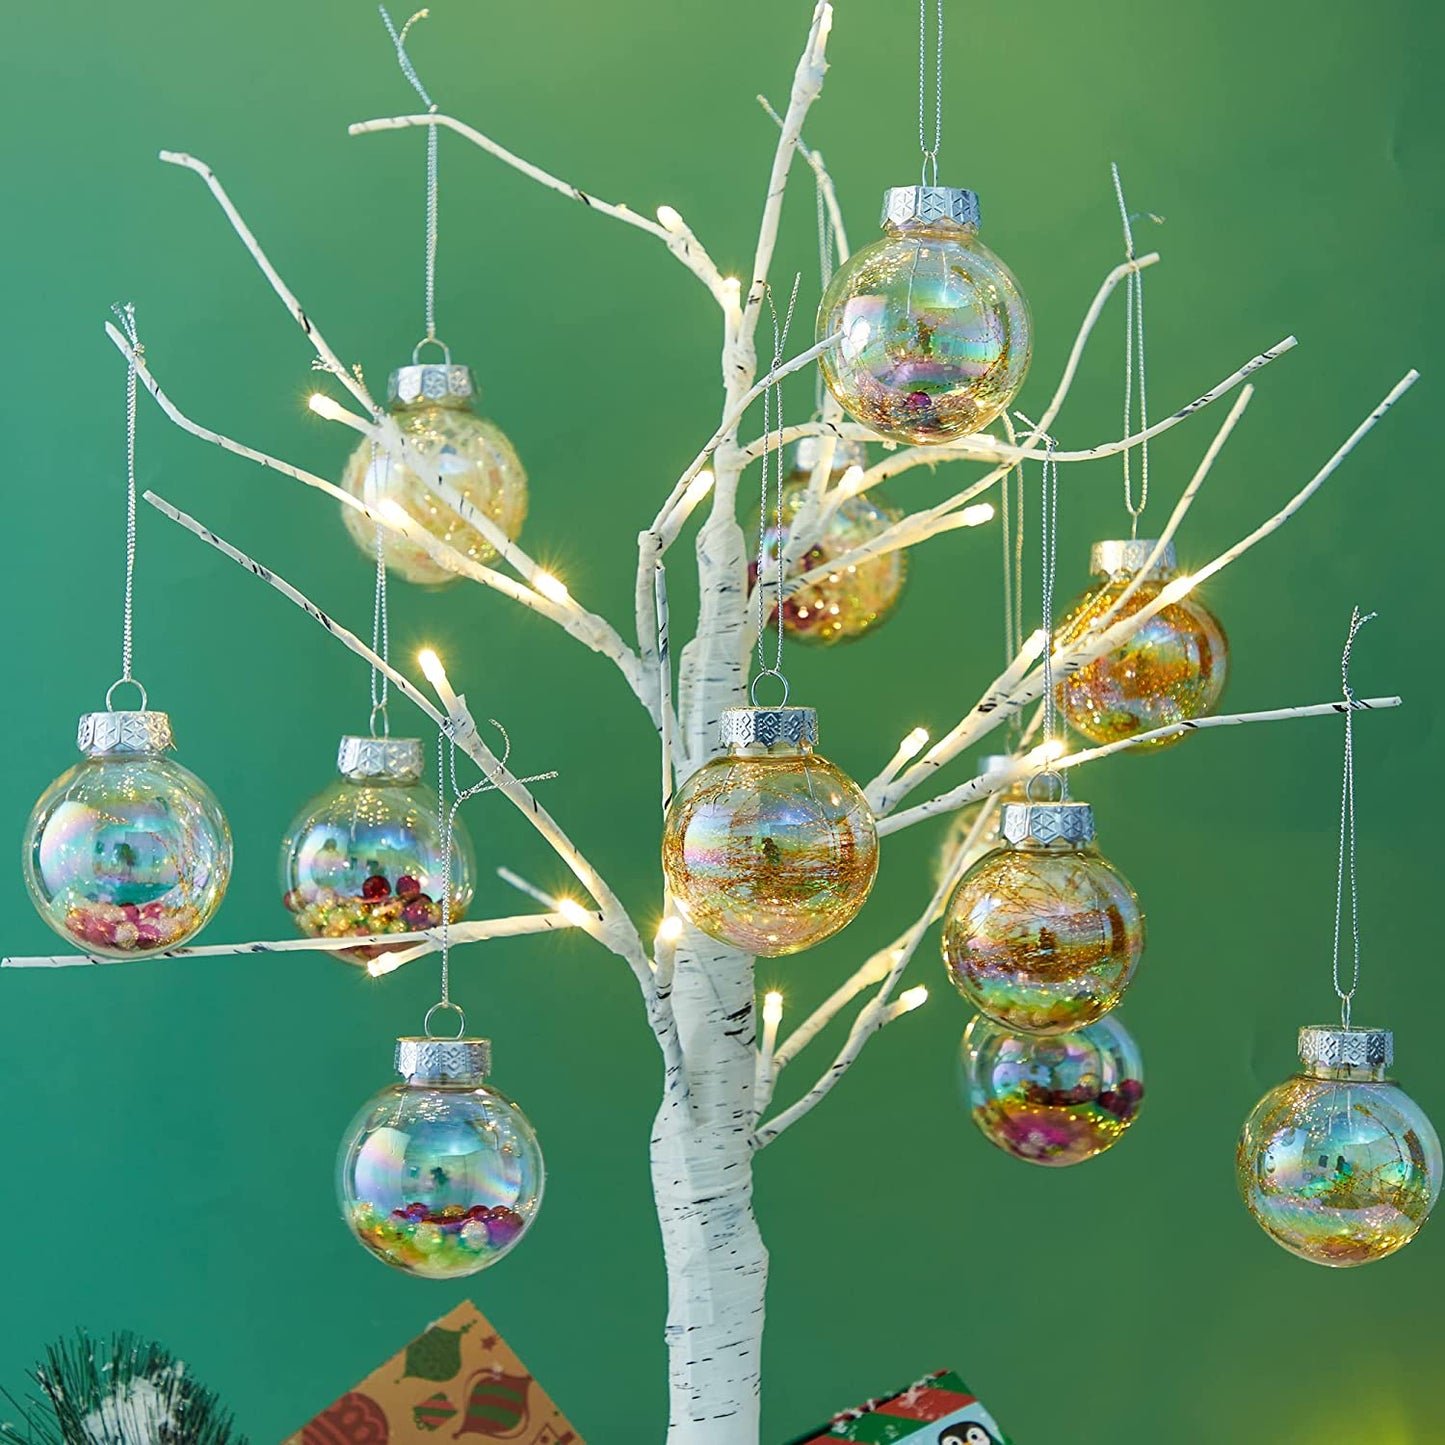 12 Pcs Chrome Christmas Ornaments 2.36in